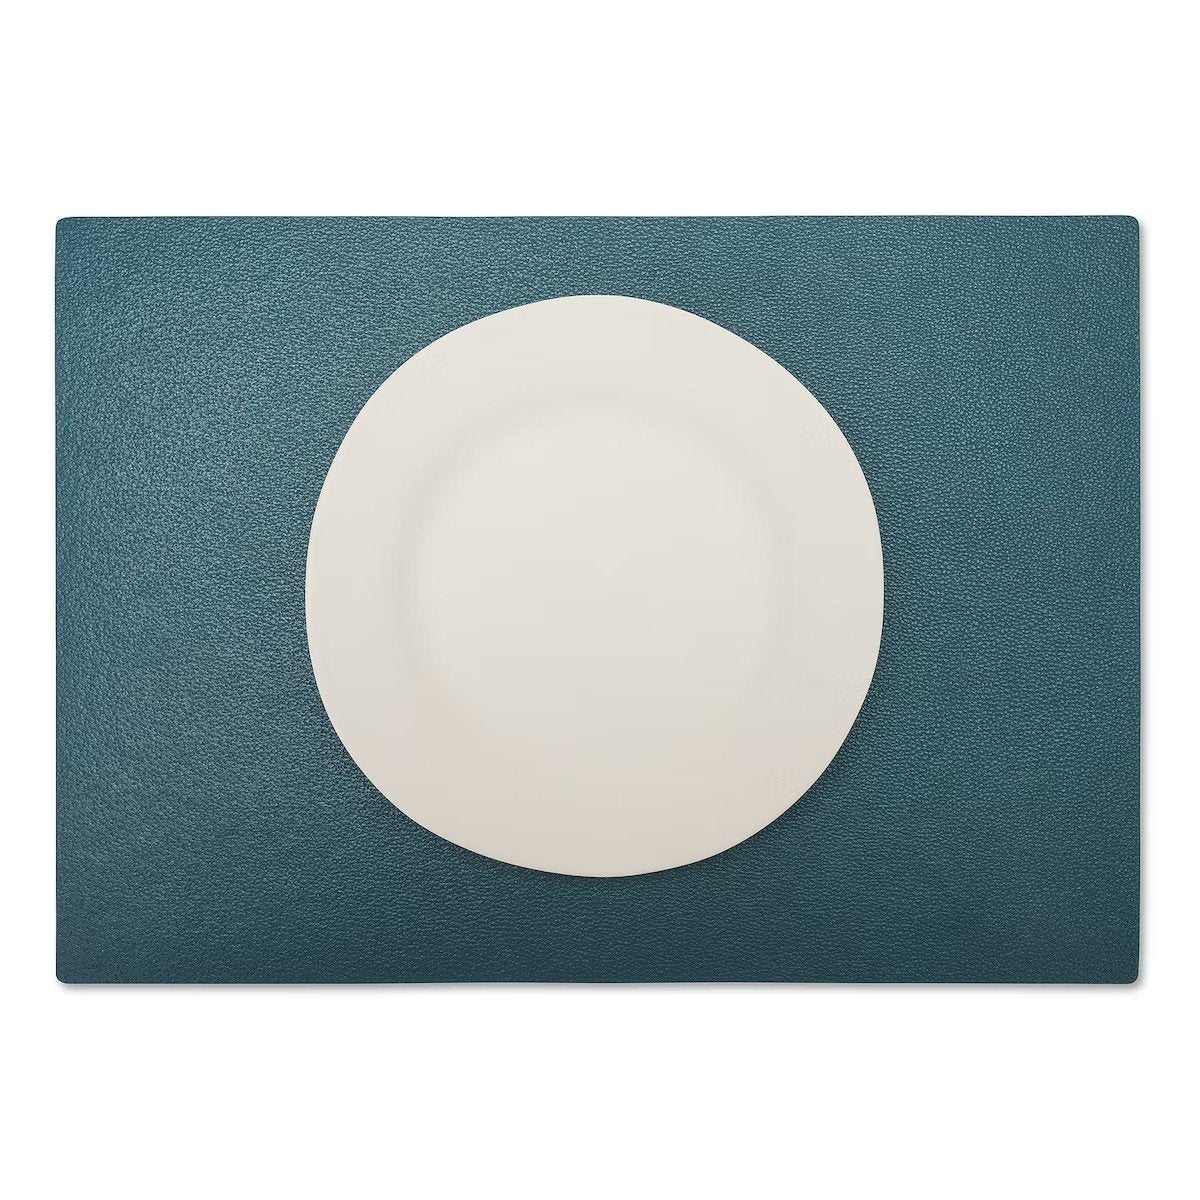 A large rectangular textured washable paper placemat in teal is shown under a white plate.